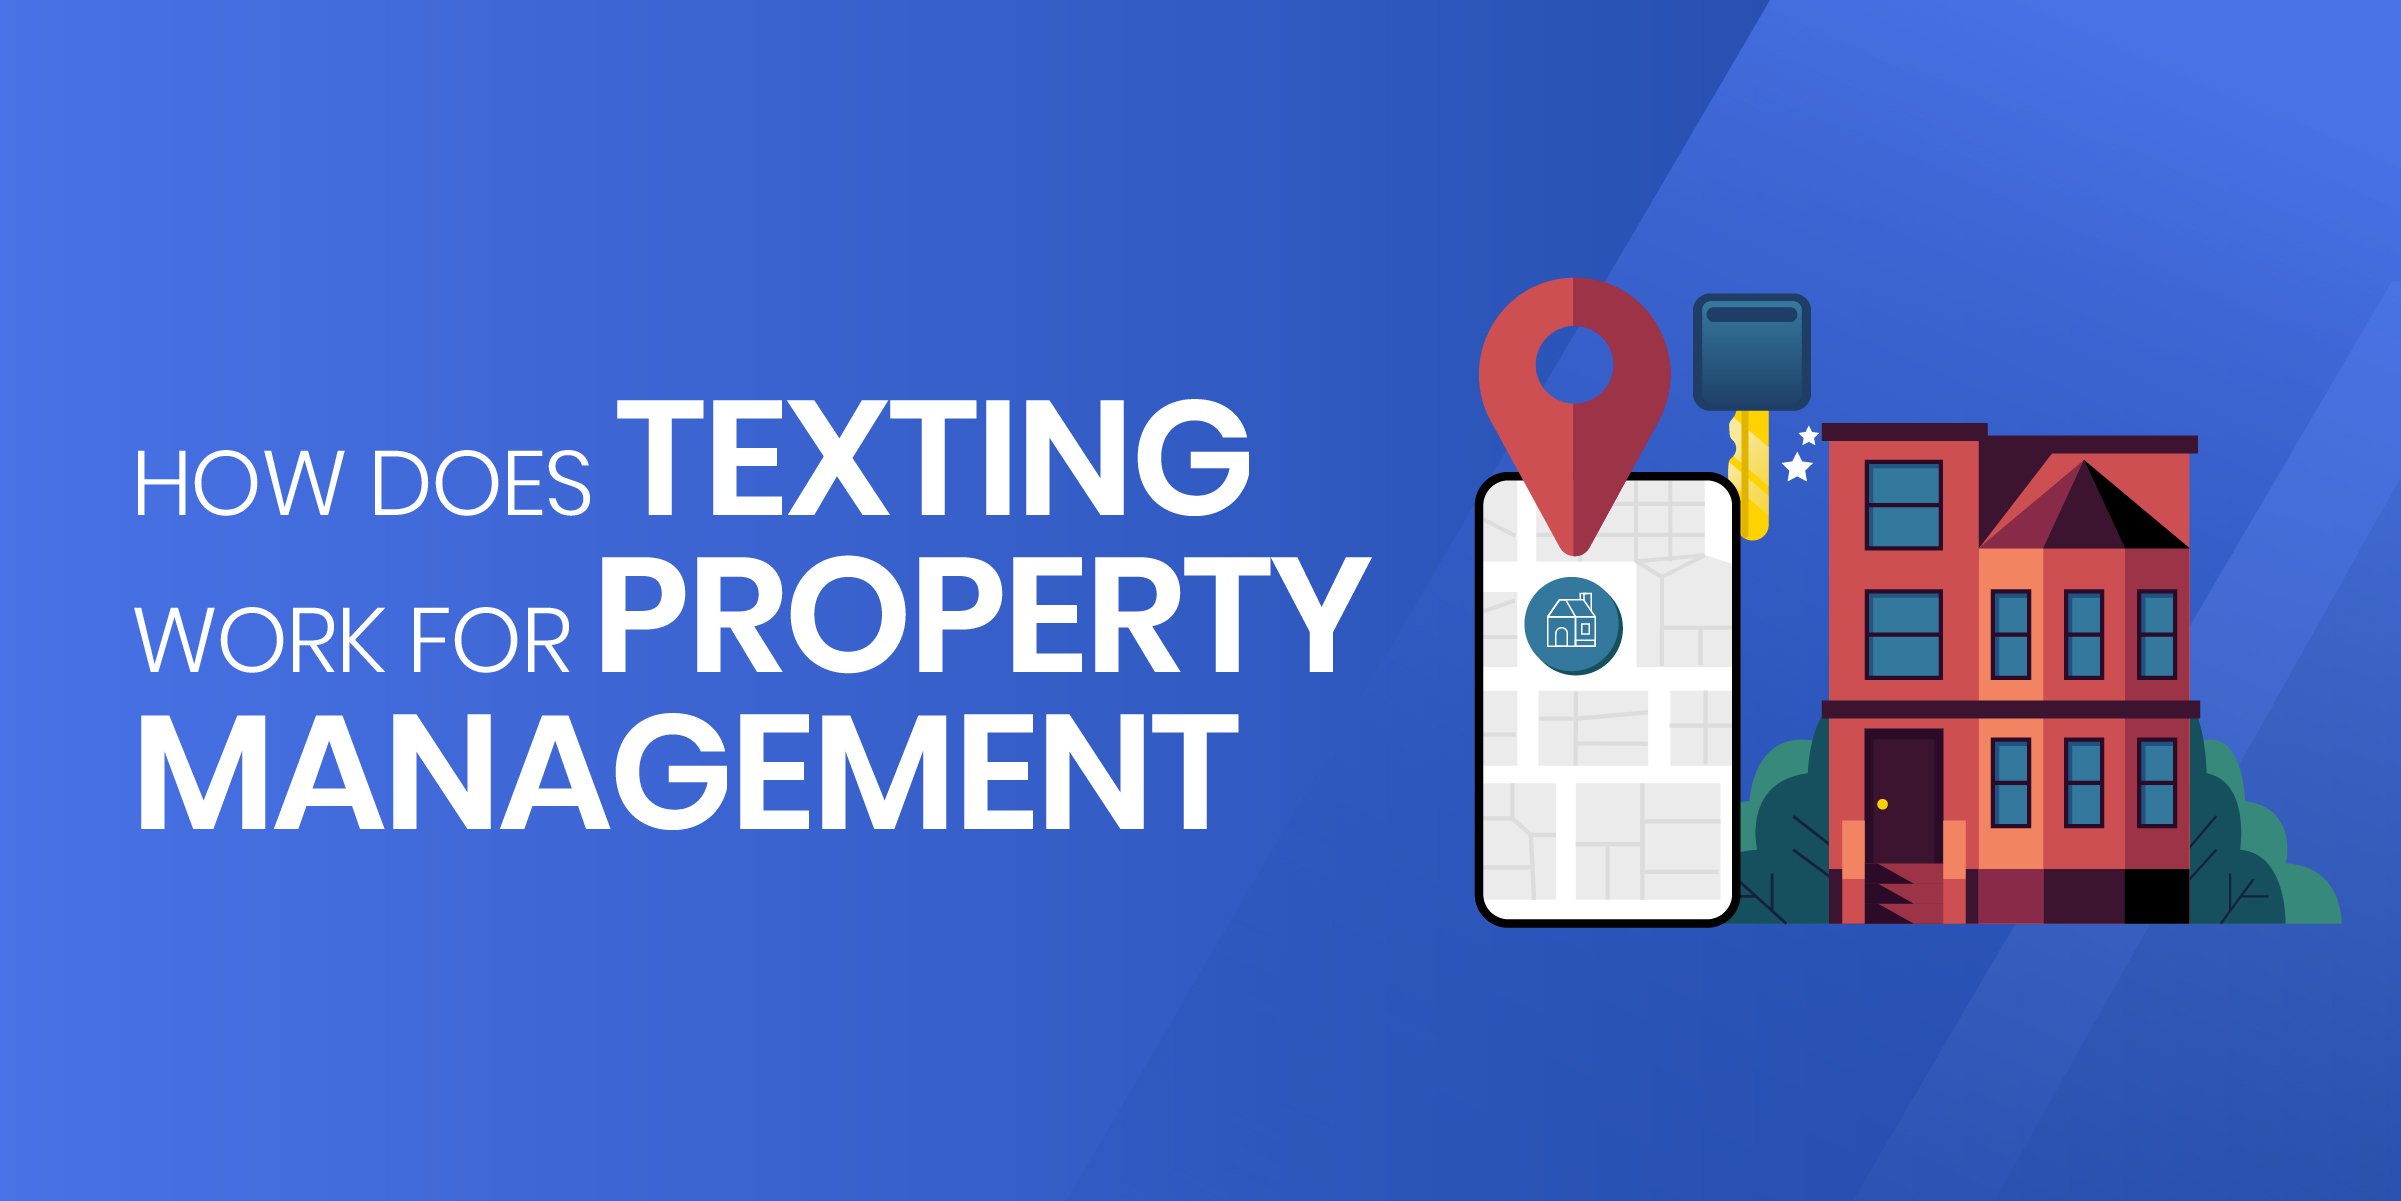 How Does Texting Work for Property Management